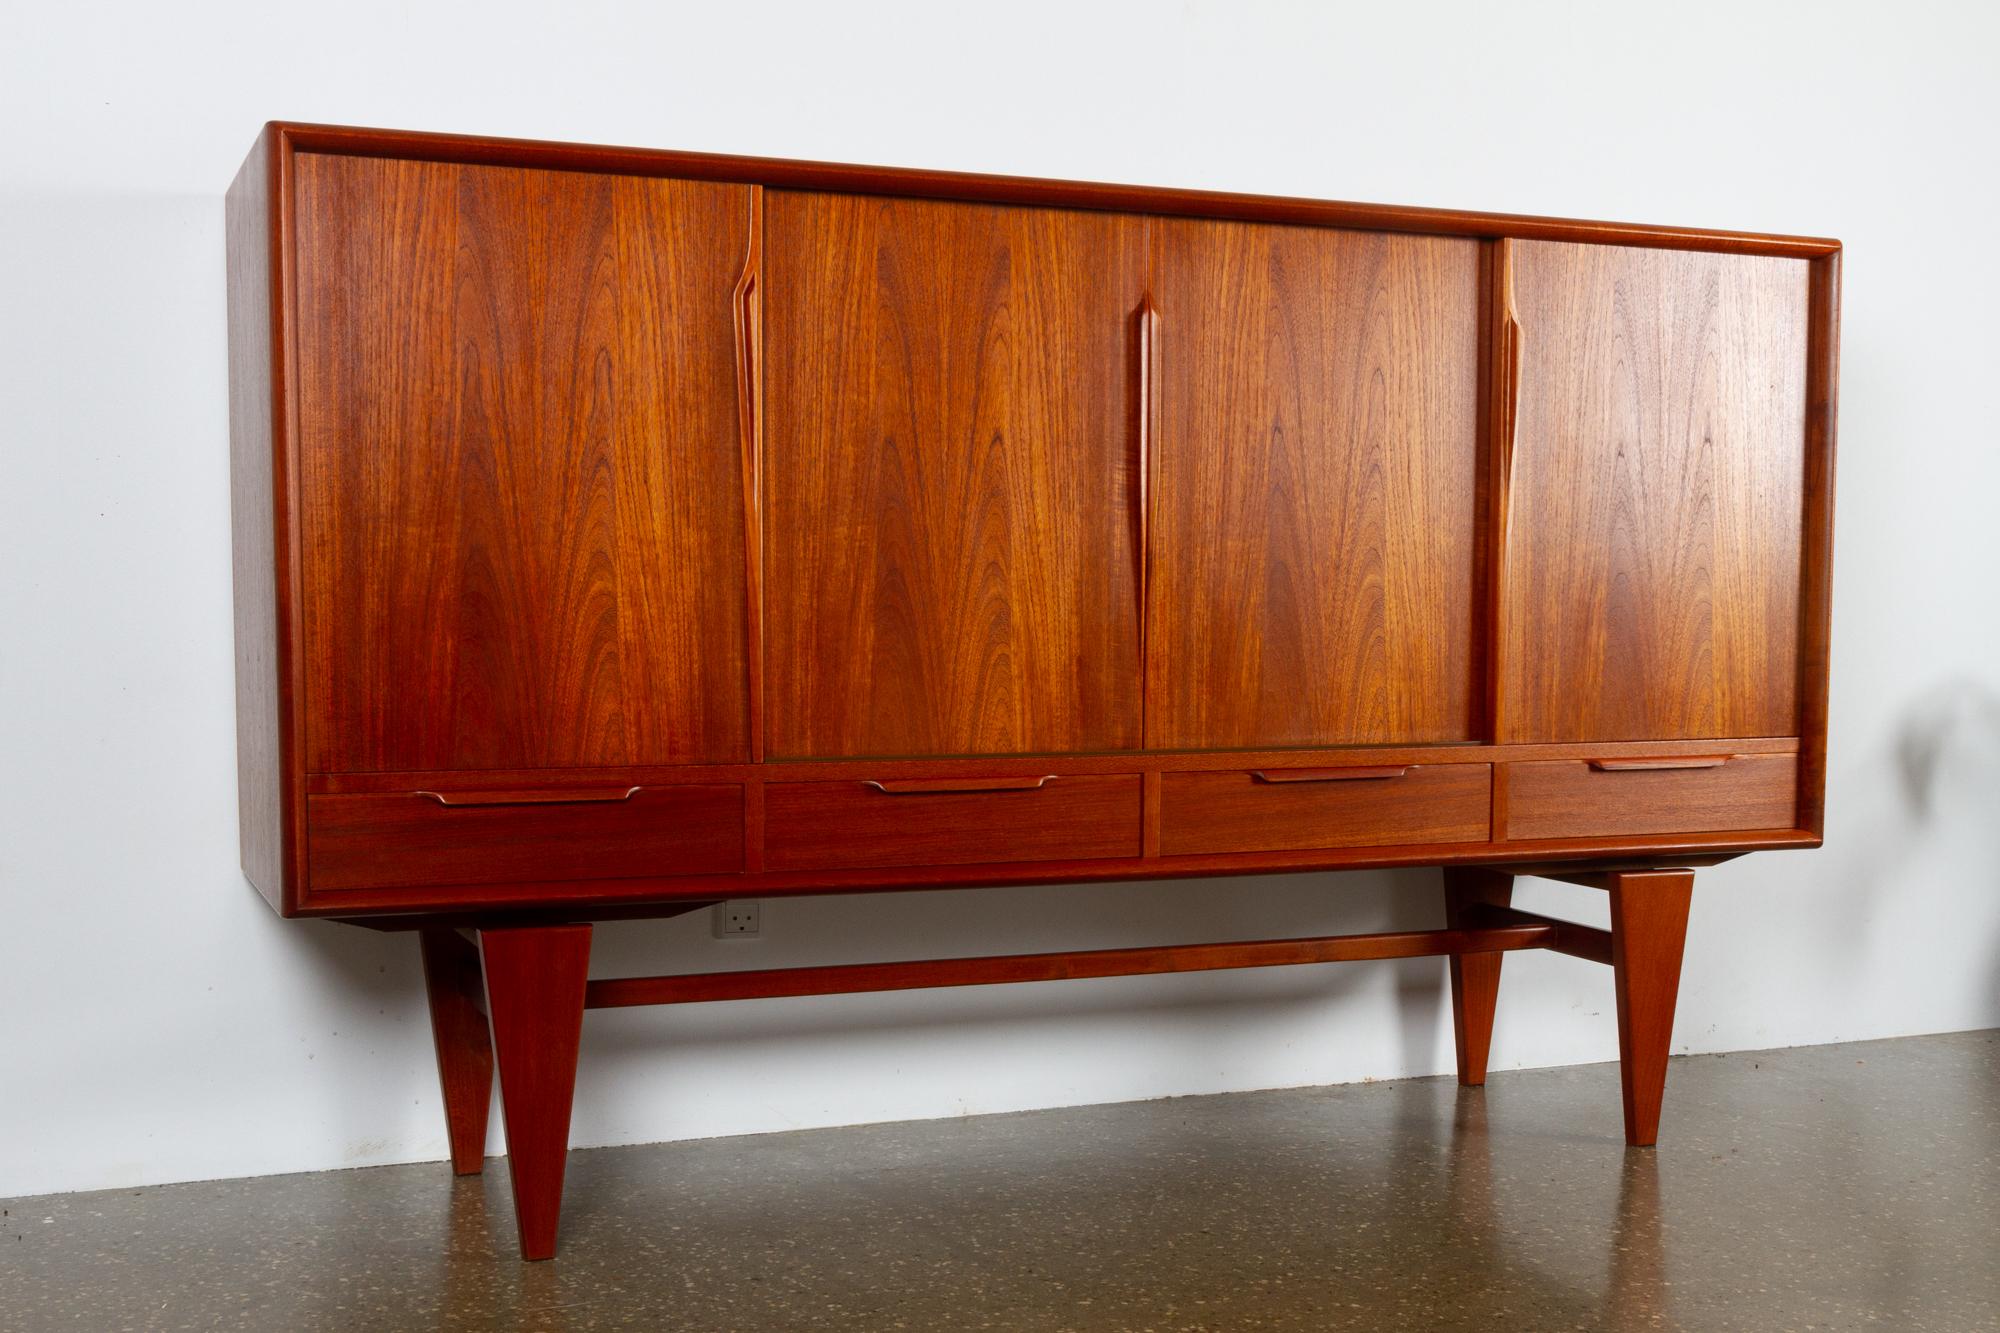 Vintage Danish teak credenza by ACO 1960s.
Very high quality highboard by Axel Christensen, Odder, Denmark. Spacious and elegantly proportioned sideboard with four sliding doors and four outside drawers. Loads of storage space with easy access.